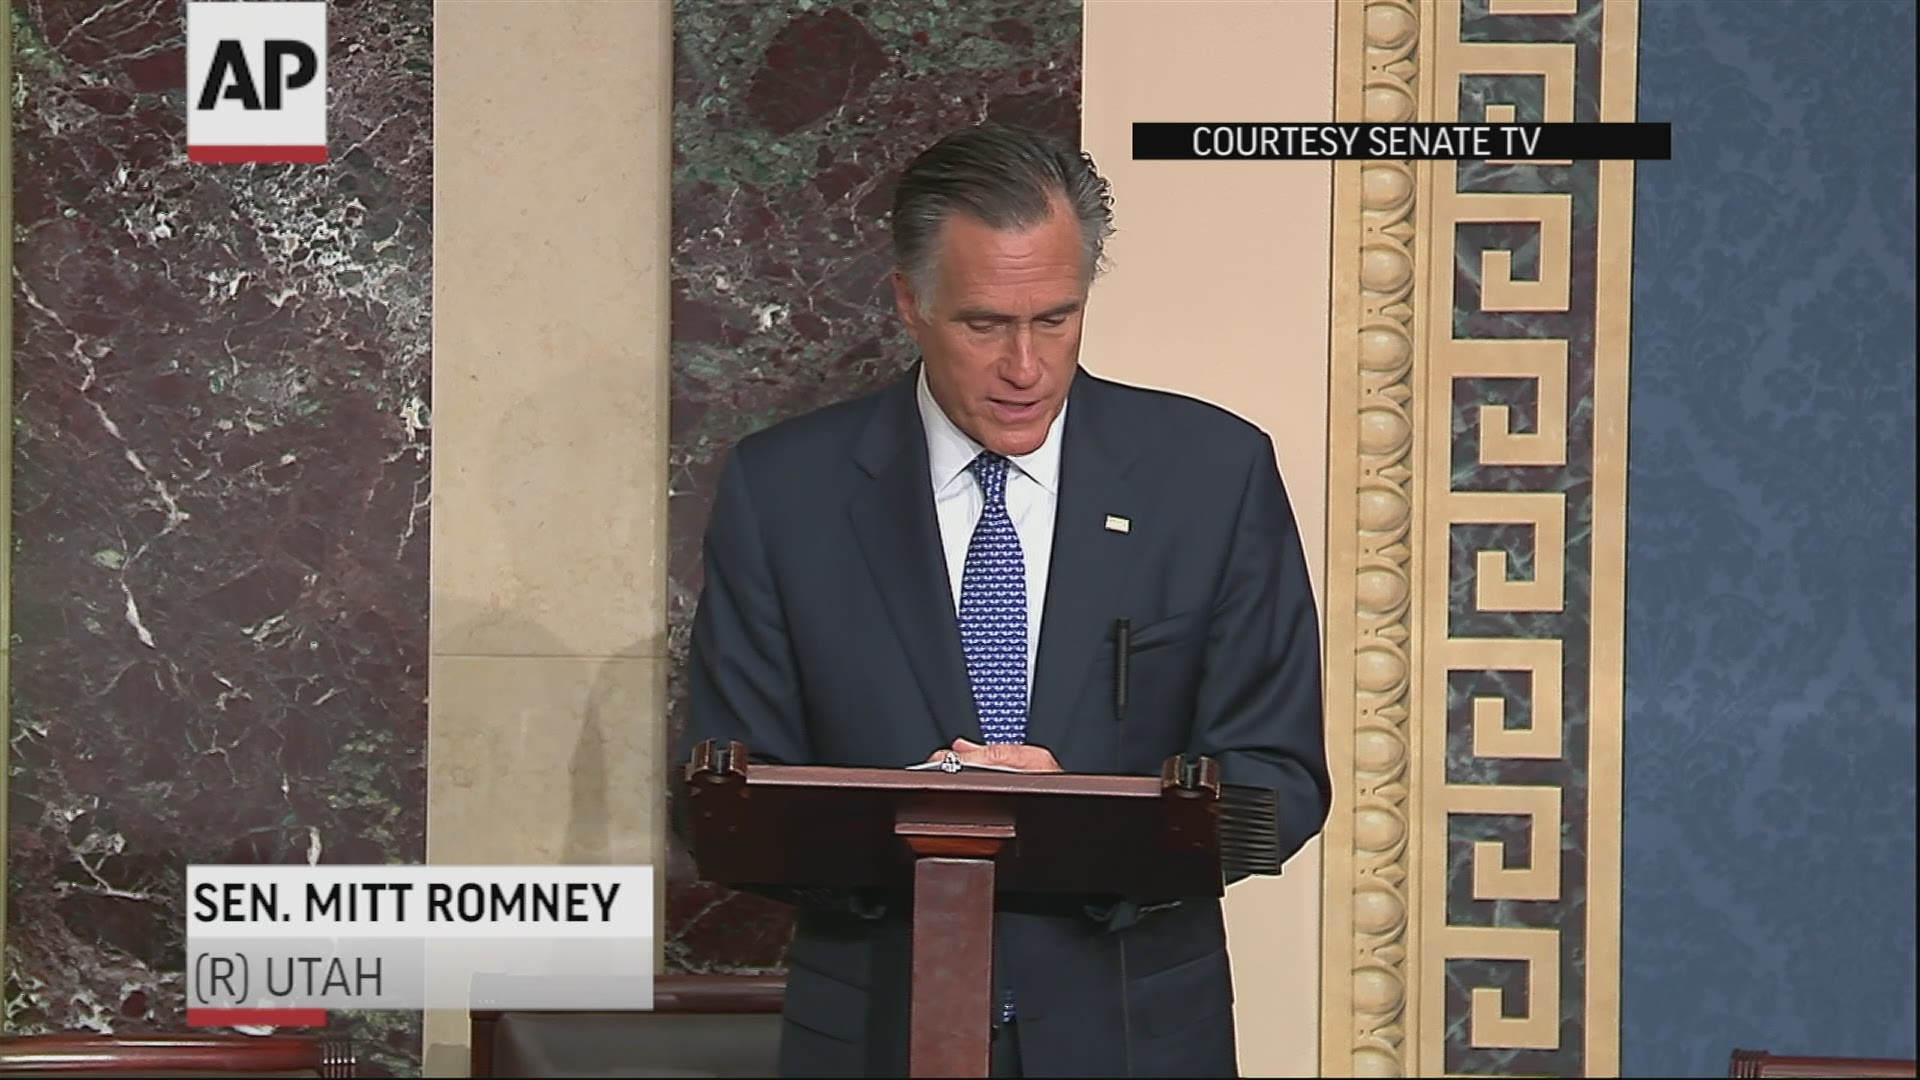 Sen. Mitt Romney of Utah announced on the Senate floor that he was breaking with his party. Romney appeared to choke up as he spoke.